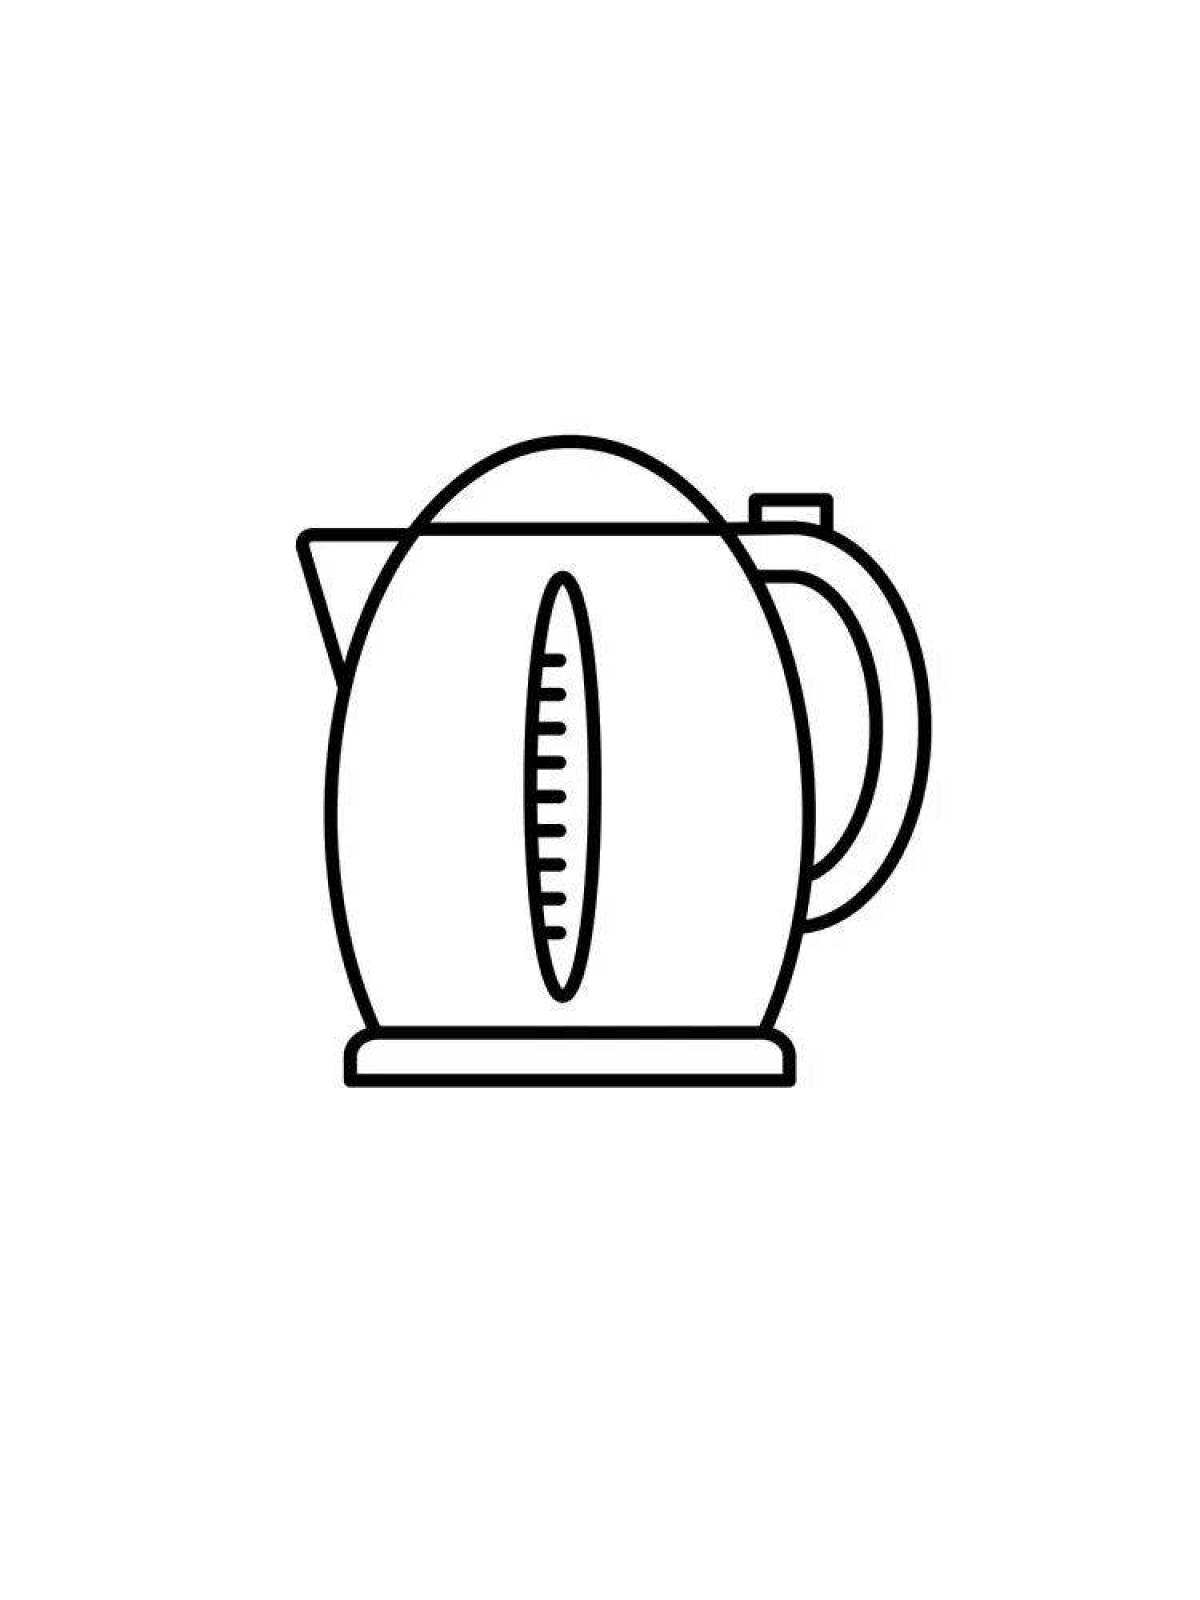 Electric kettle #19